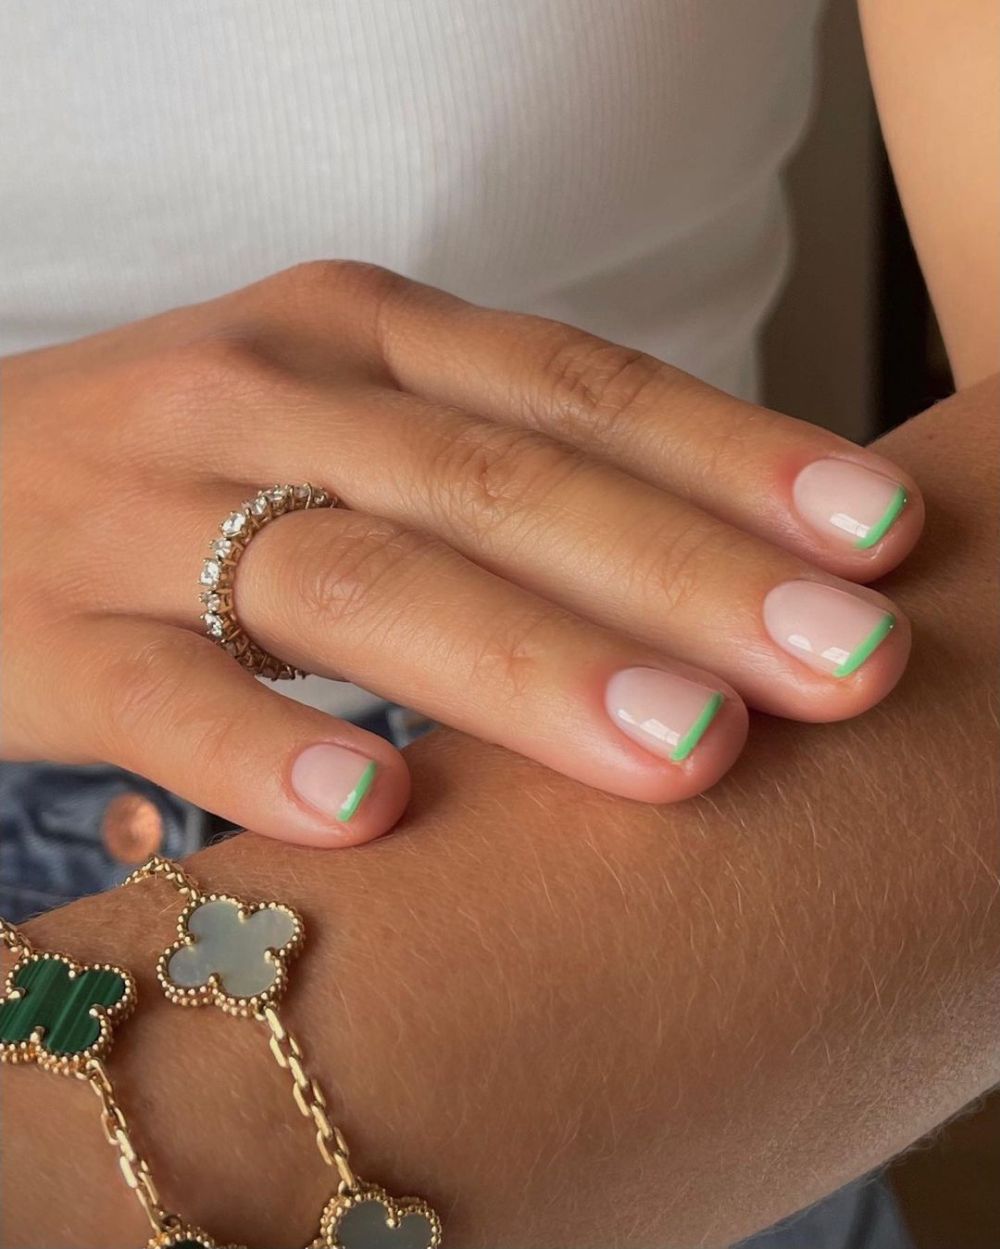 green french tip nails